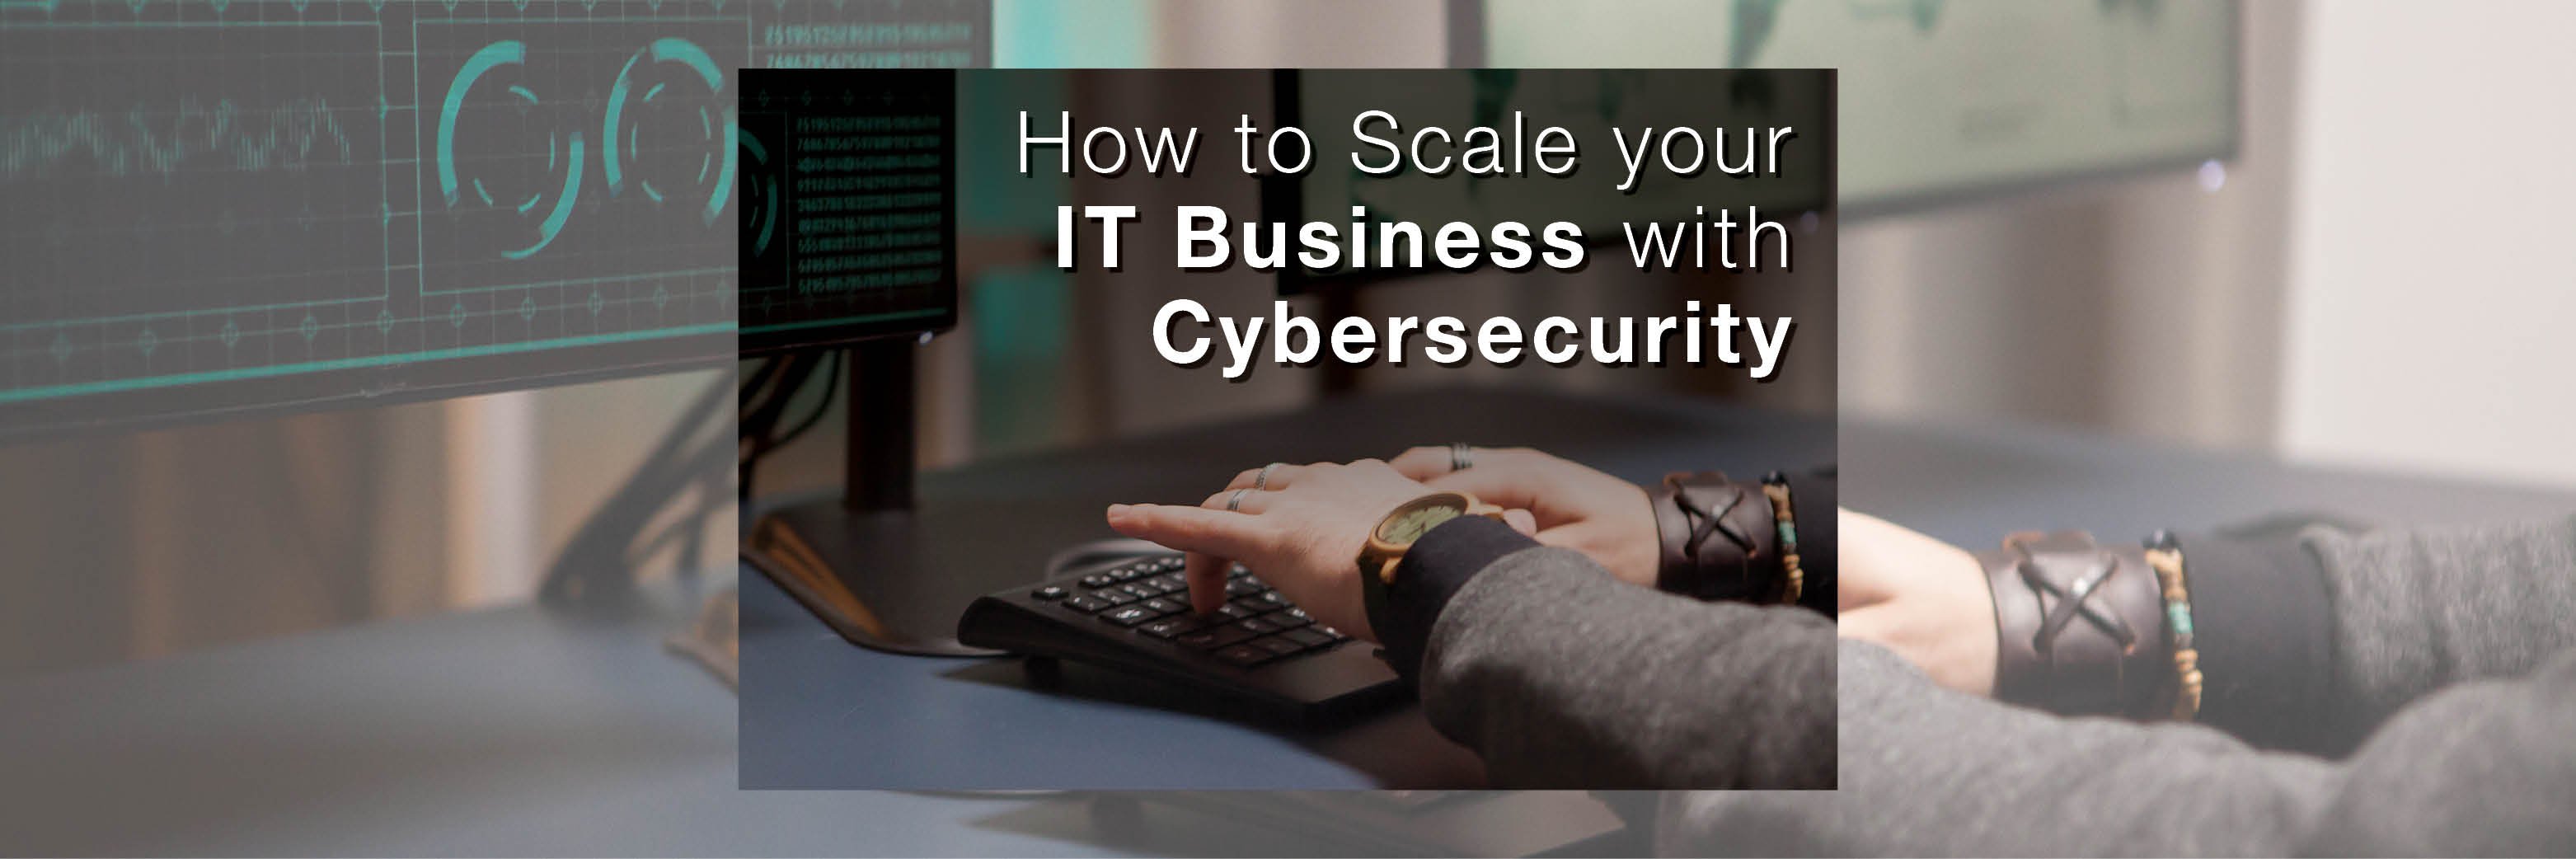 How to Scale Your IT Business with Cybersecurity